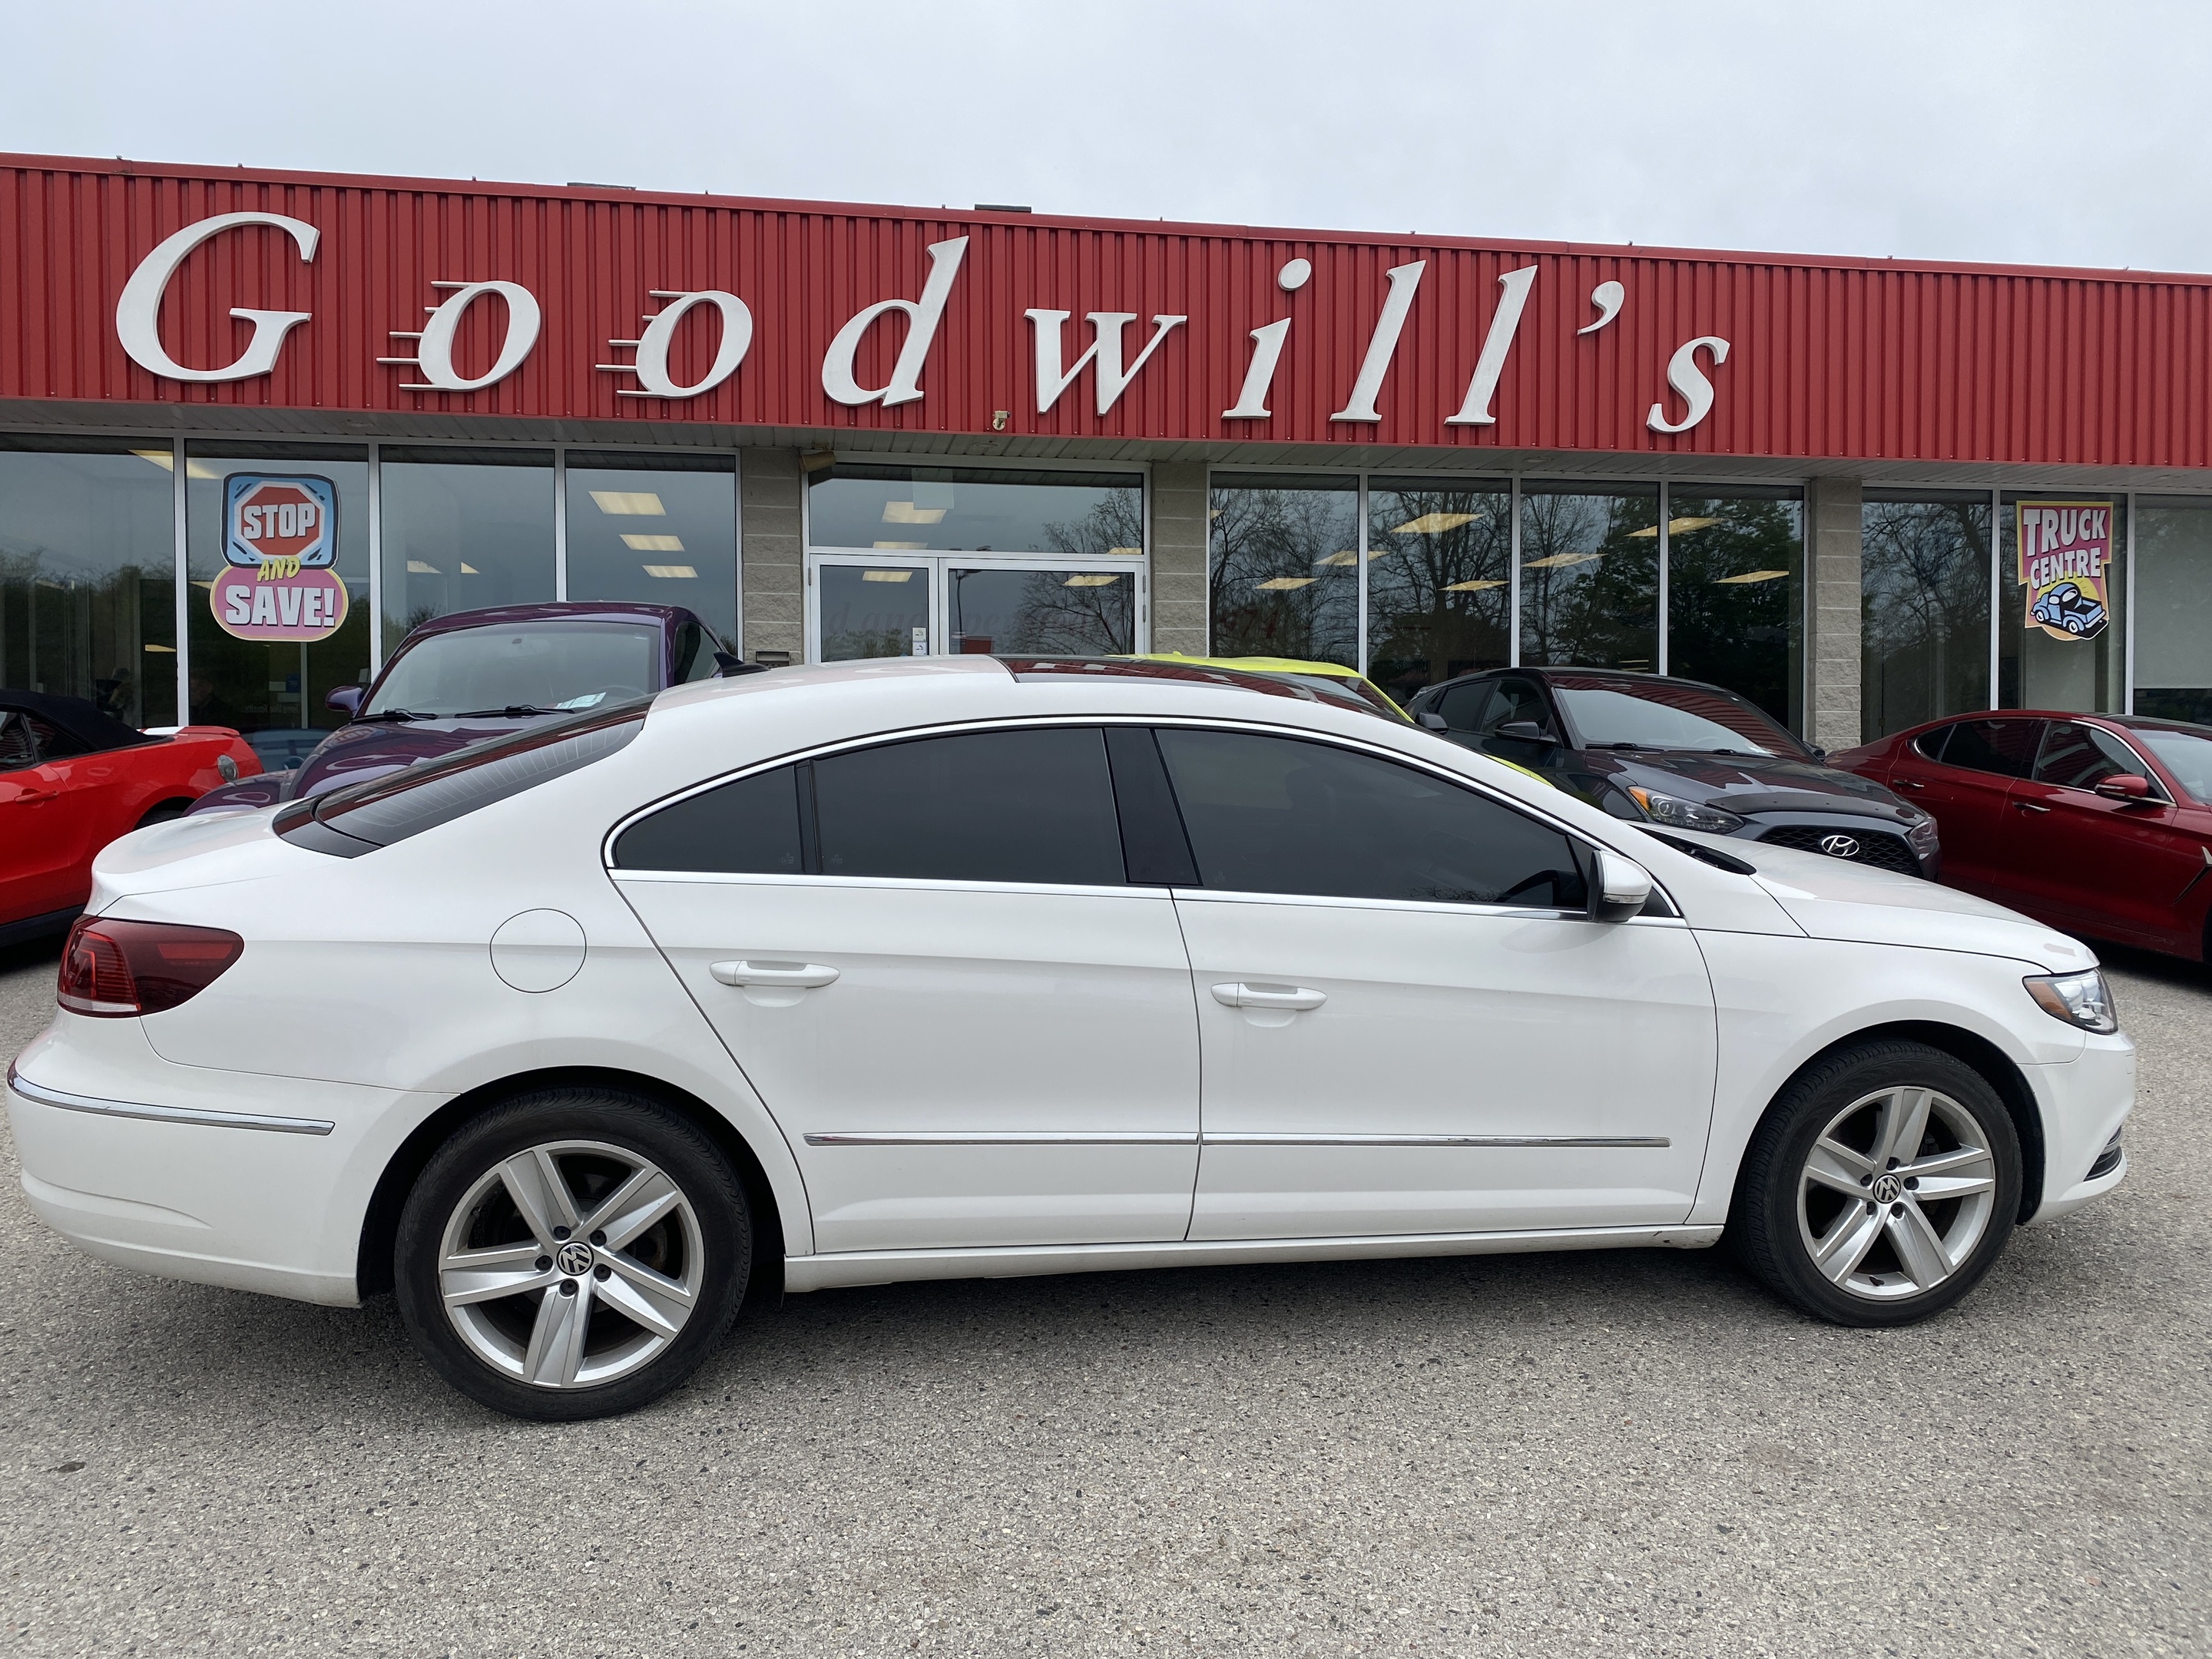 2014 Volkswagen CC CC, 6 SPEED MANUAL, SUNROOF, HEATED LEATHER!